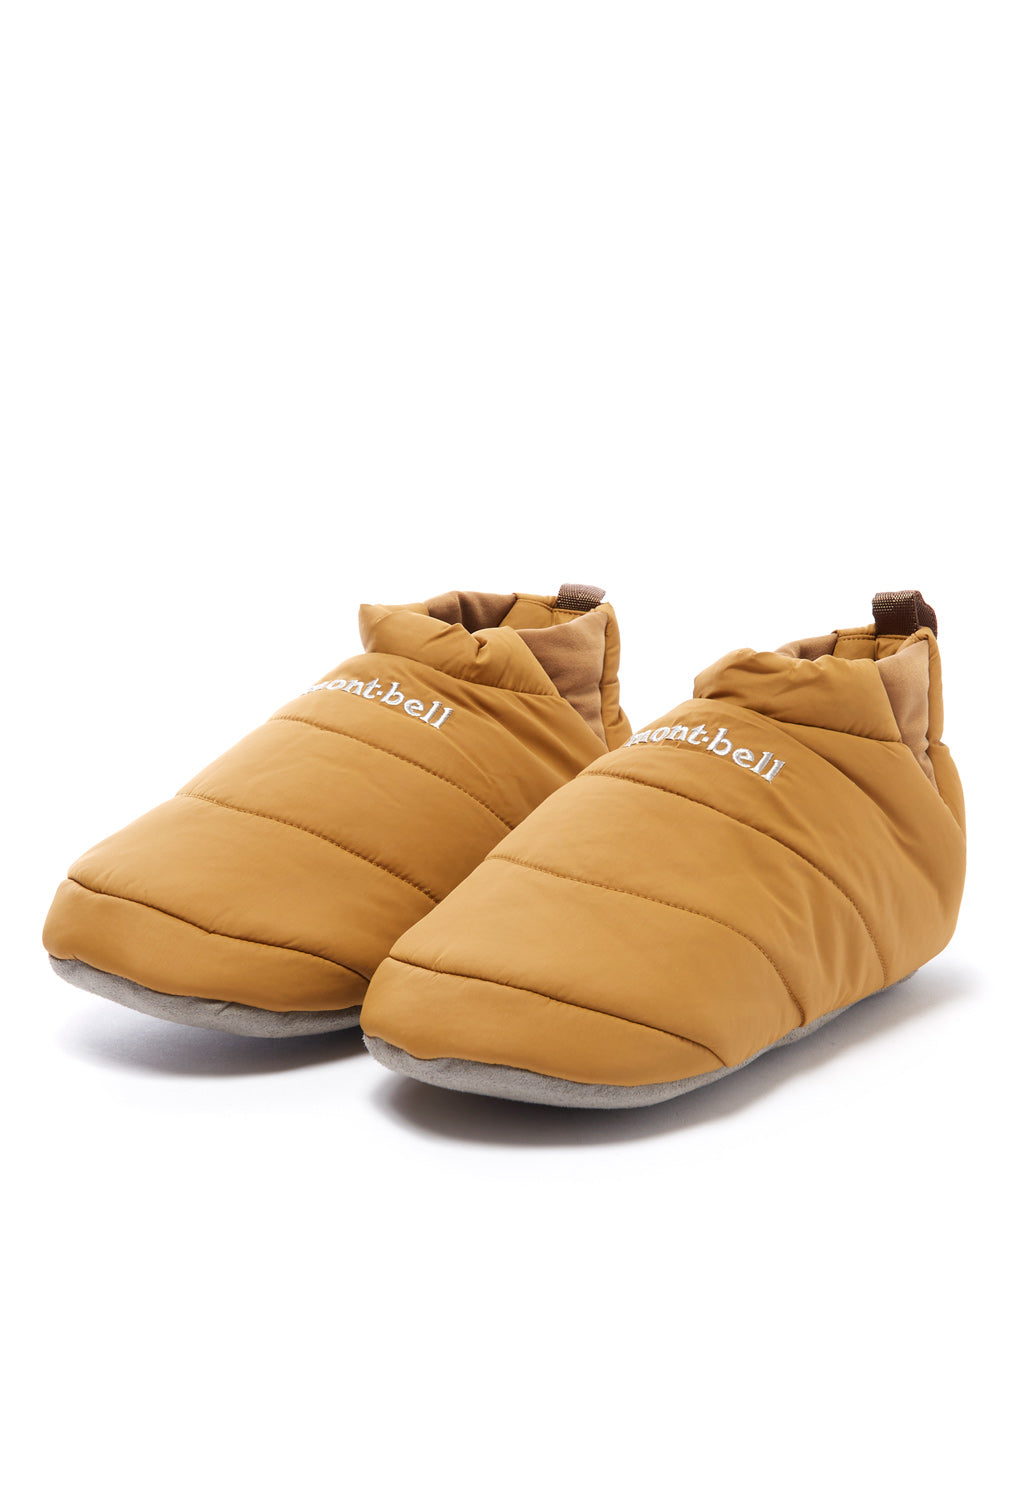 Montbell Exceloft Camp Shoes - Brown